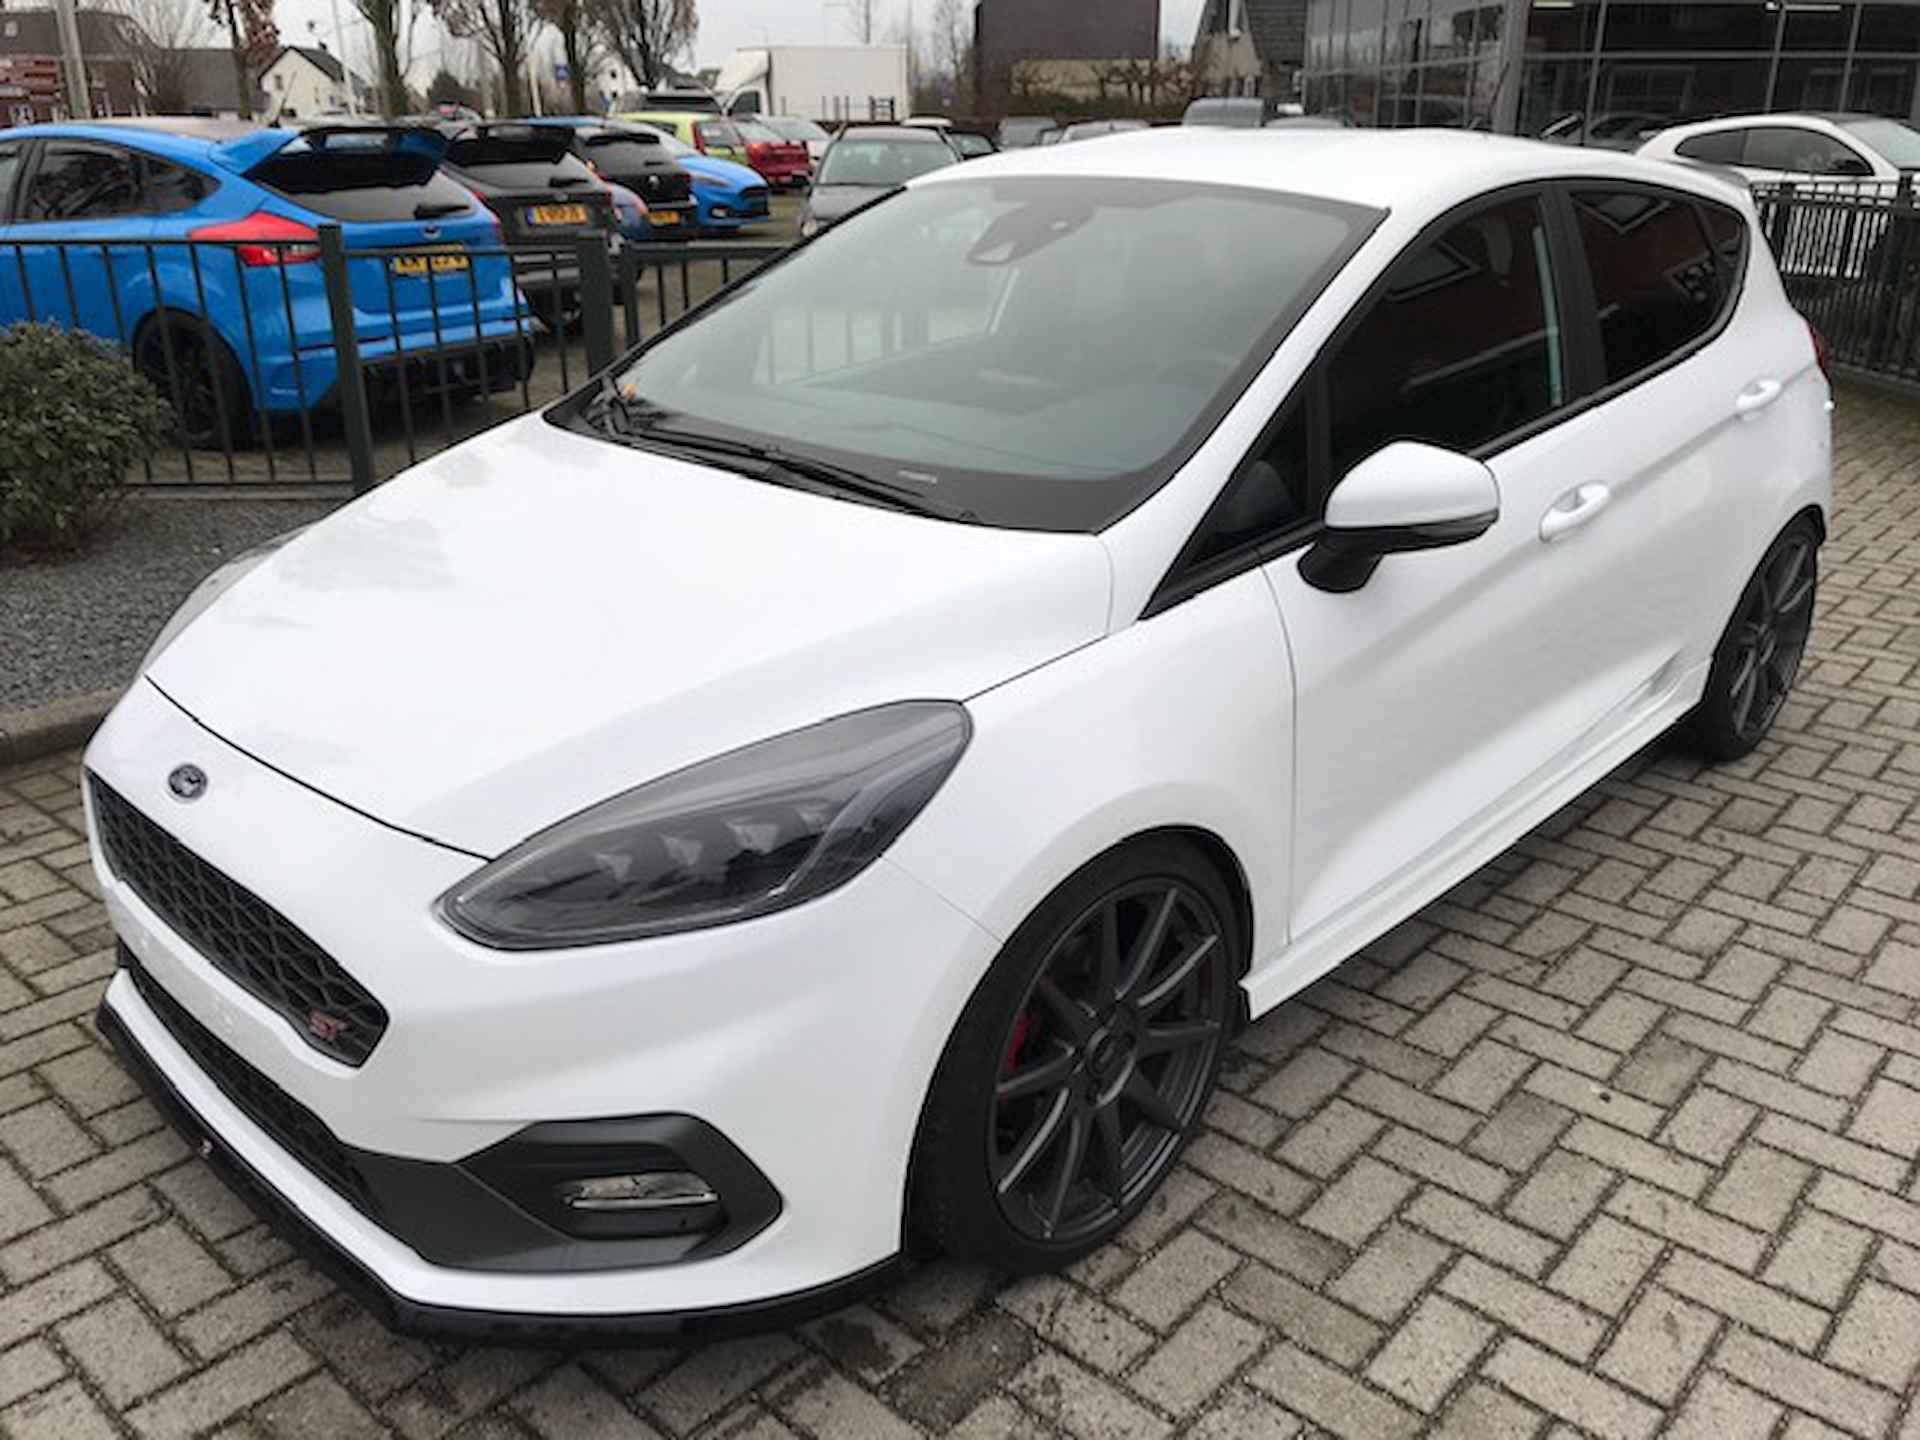 Ford Fiesta 1.5 EcoBoost ST-3 Mountune 235 PK Performance - 6/11